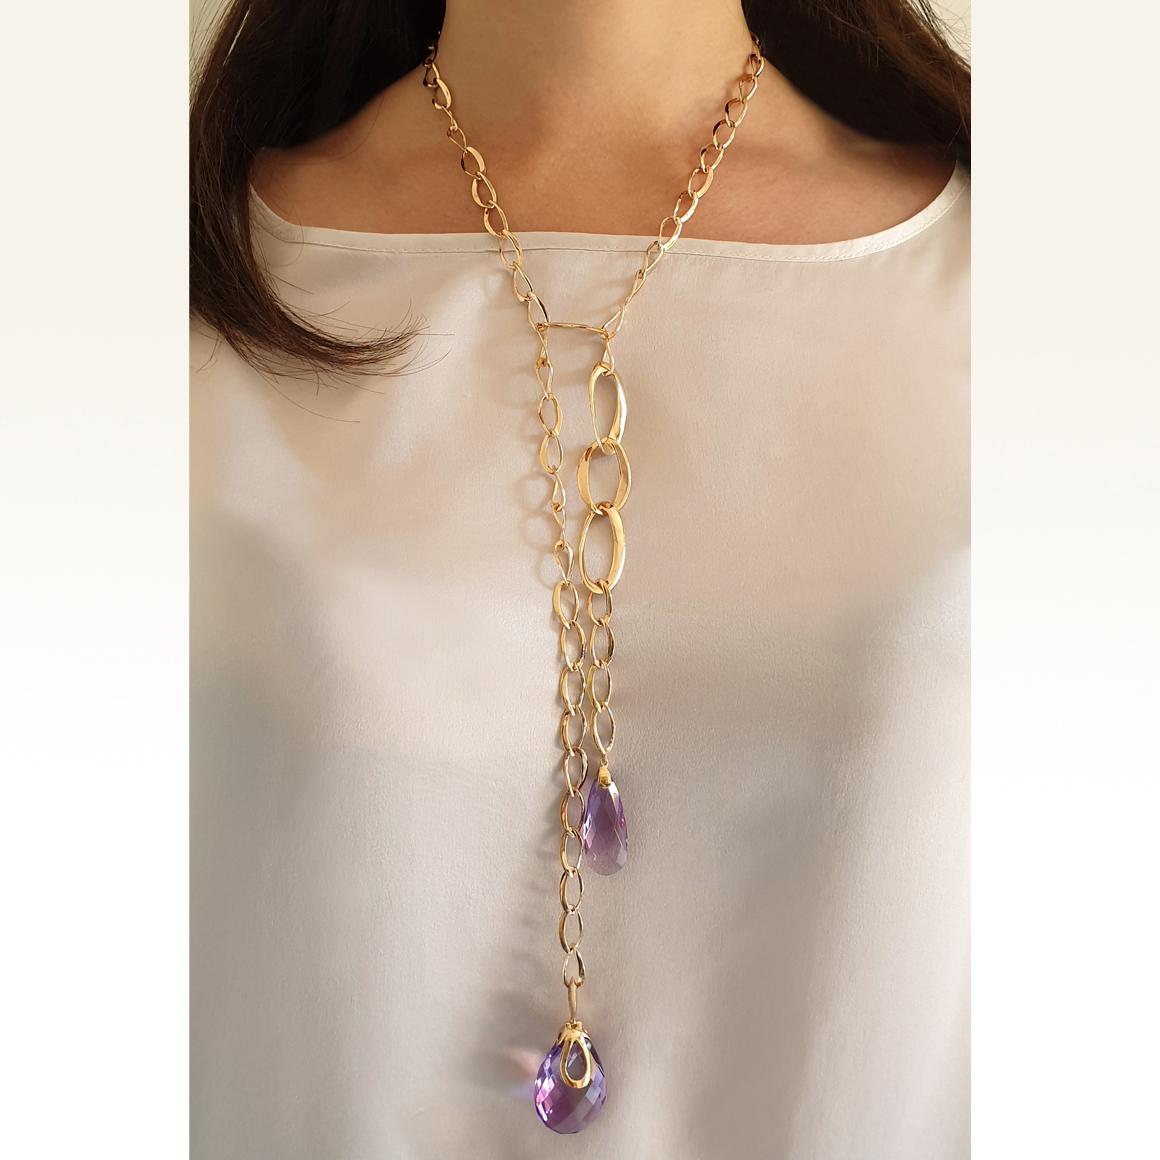 Long Necklace in 14k rose gold with two drops of Amethyst (big size: 20x32 mm; smaller size: 12x30 mm)   cm 80  g.46,00
New product ! This elegant and fashion neckalce is perfect of woman who does not neglect the details. Made in Italy by Stanoppi